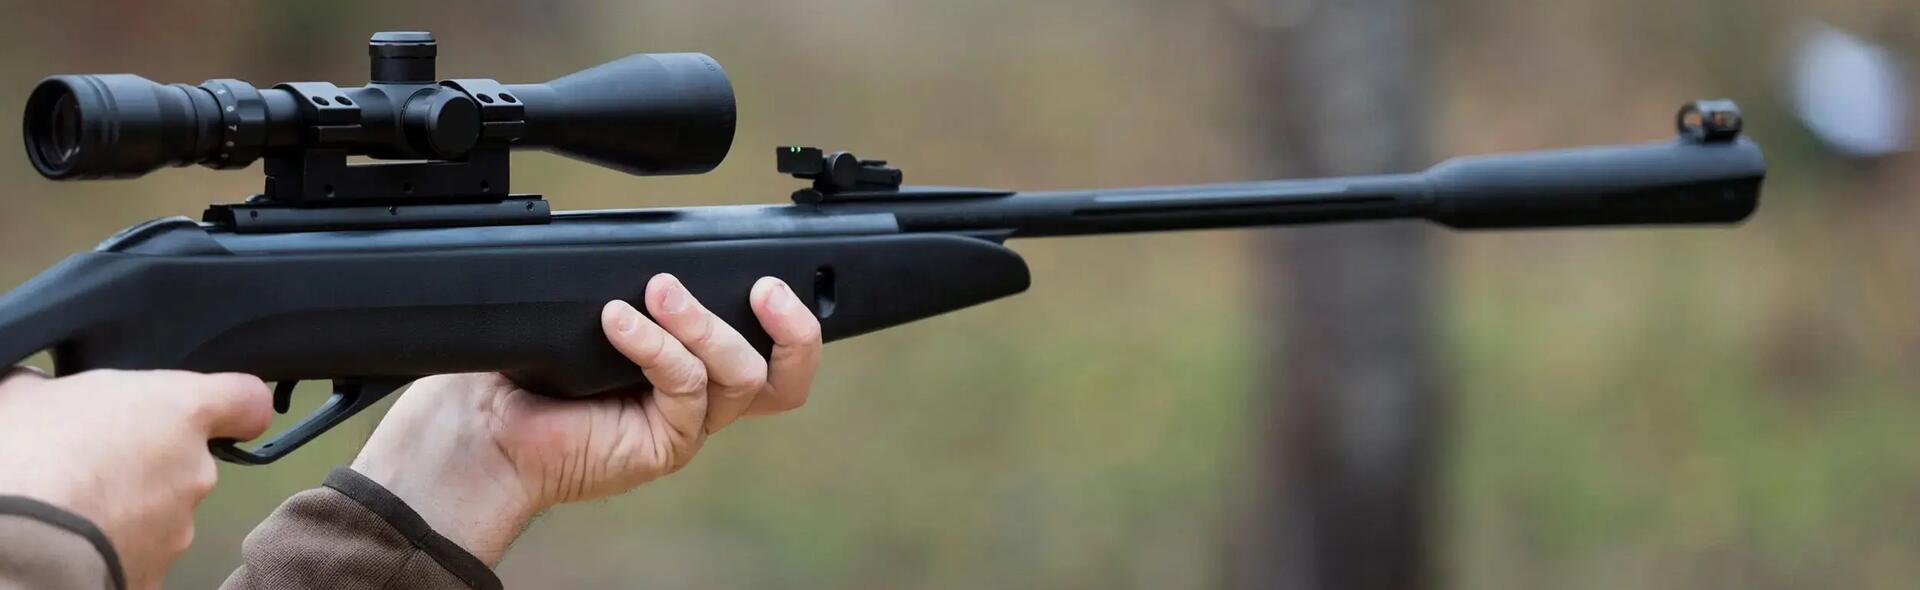 Air rifle training on private property 